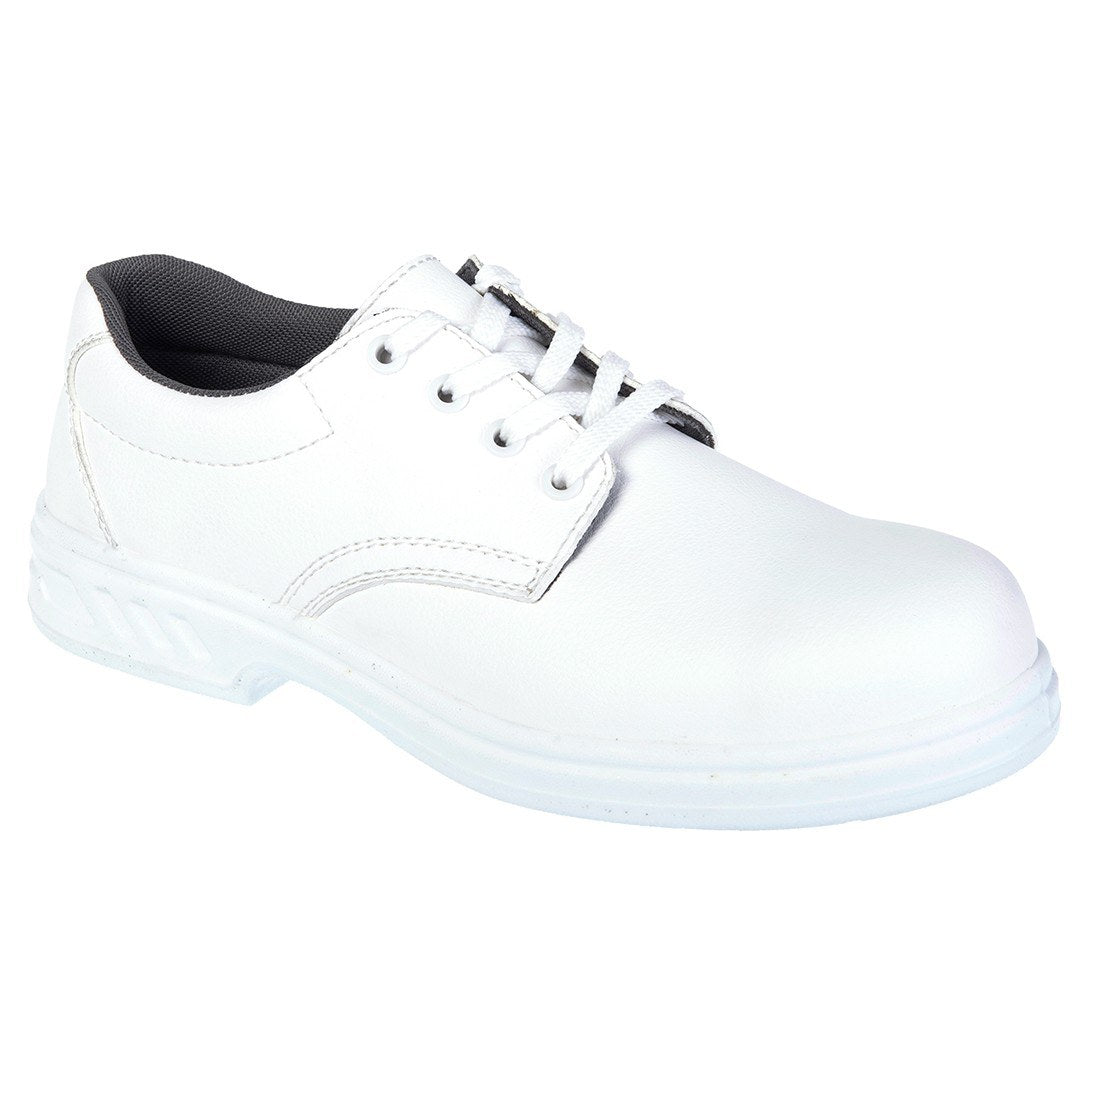 Laced Microfibre Safety Shoe - Uniforms and Workwear NZ - Ticketwearconz